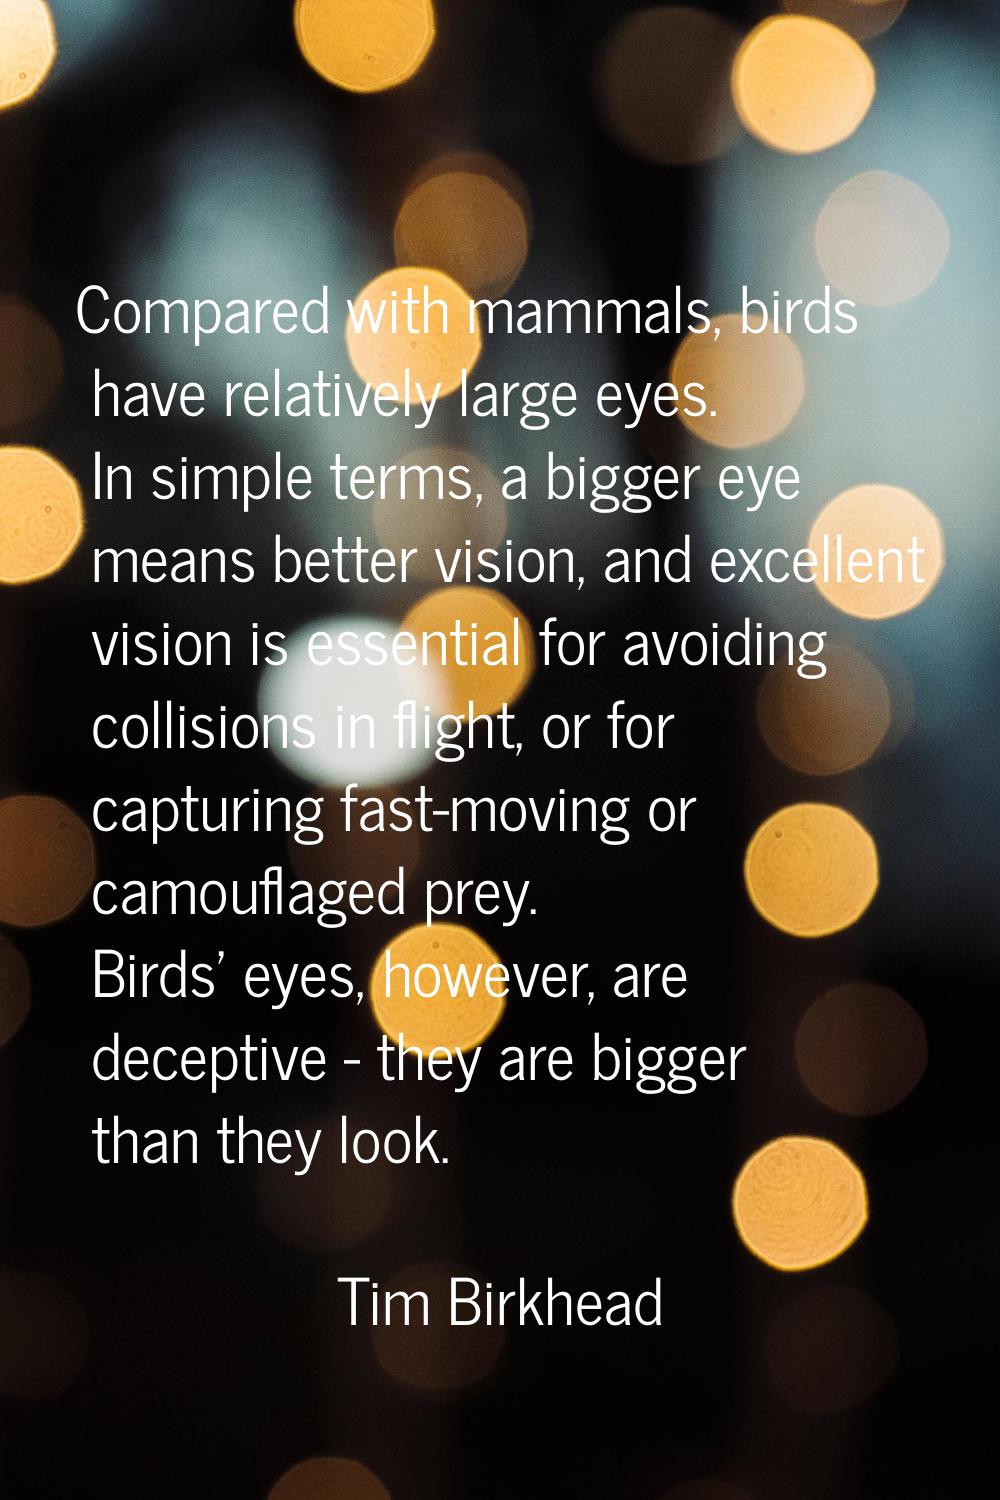 Compared with mammals, birds have relatively large eyes. In simple terms, a bigger eye means better